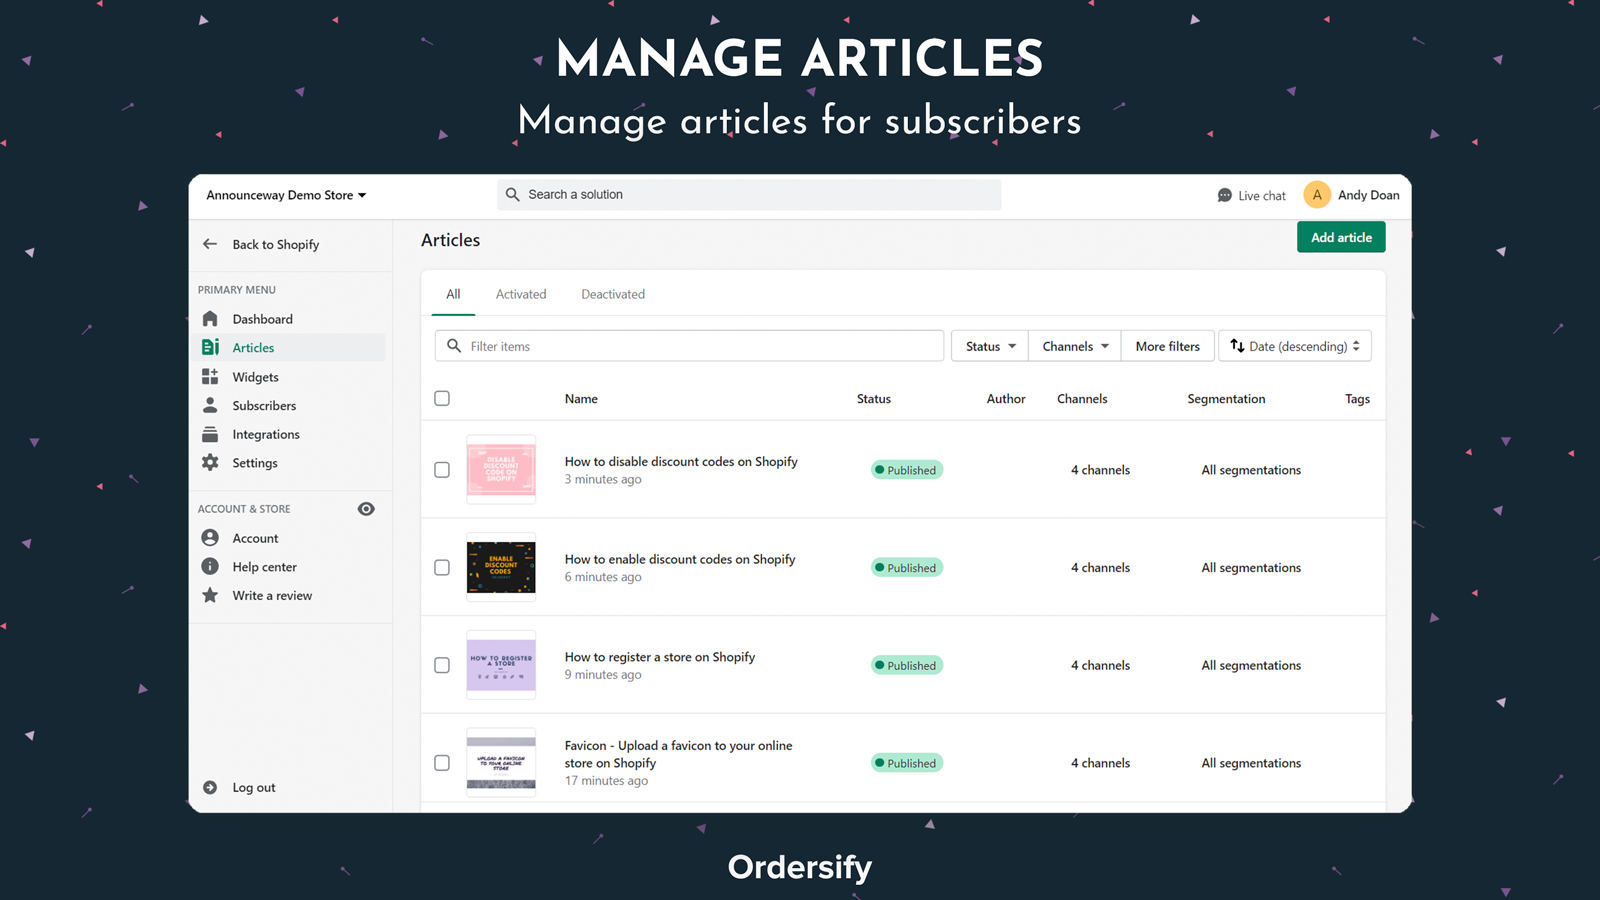 Manage articles